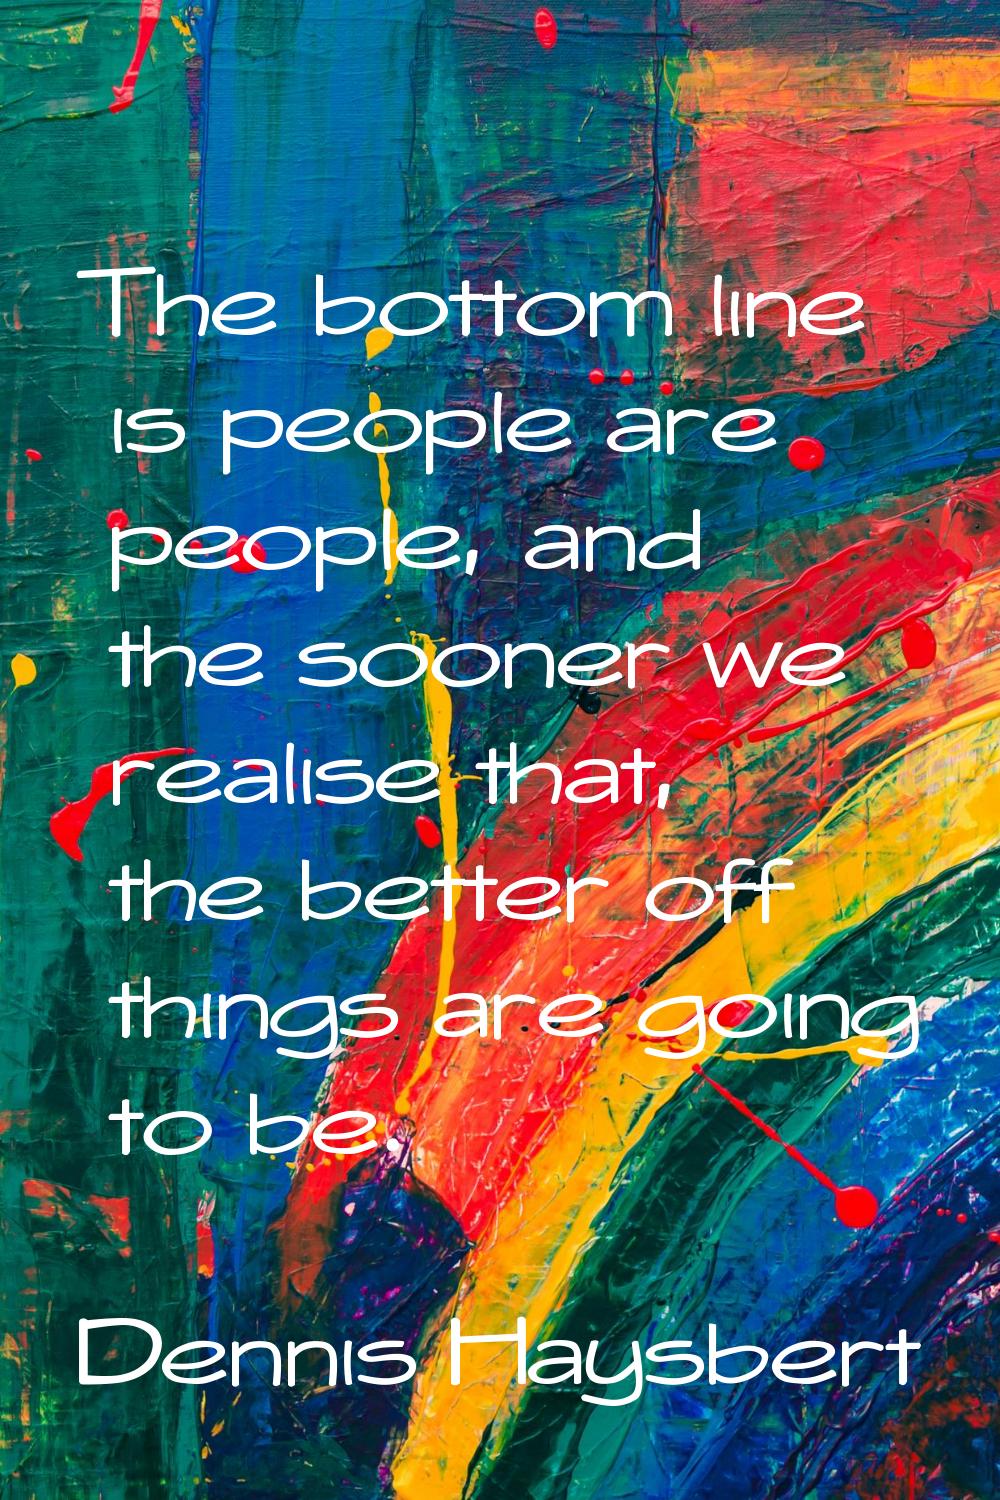 The bottom line is people are people, and the sooner we realise that, the better off things are goi